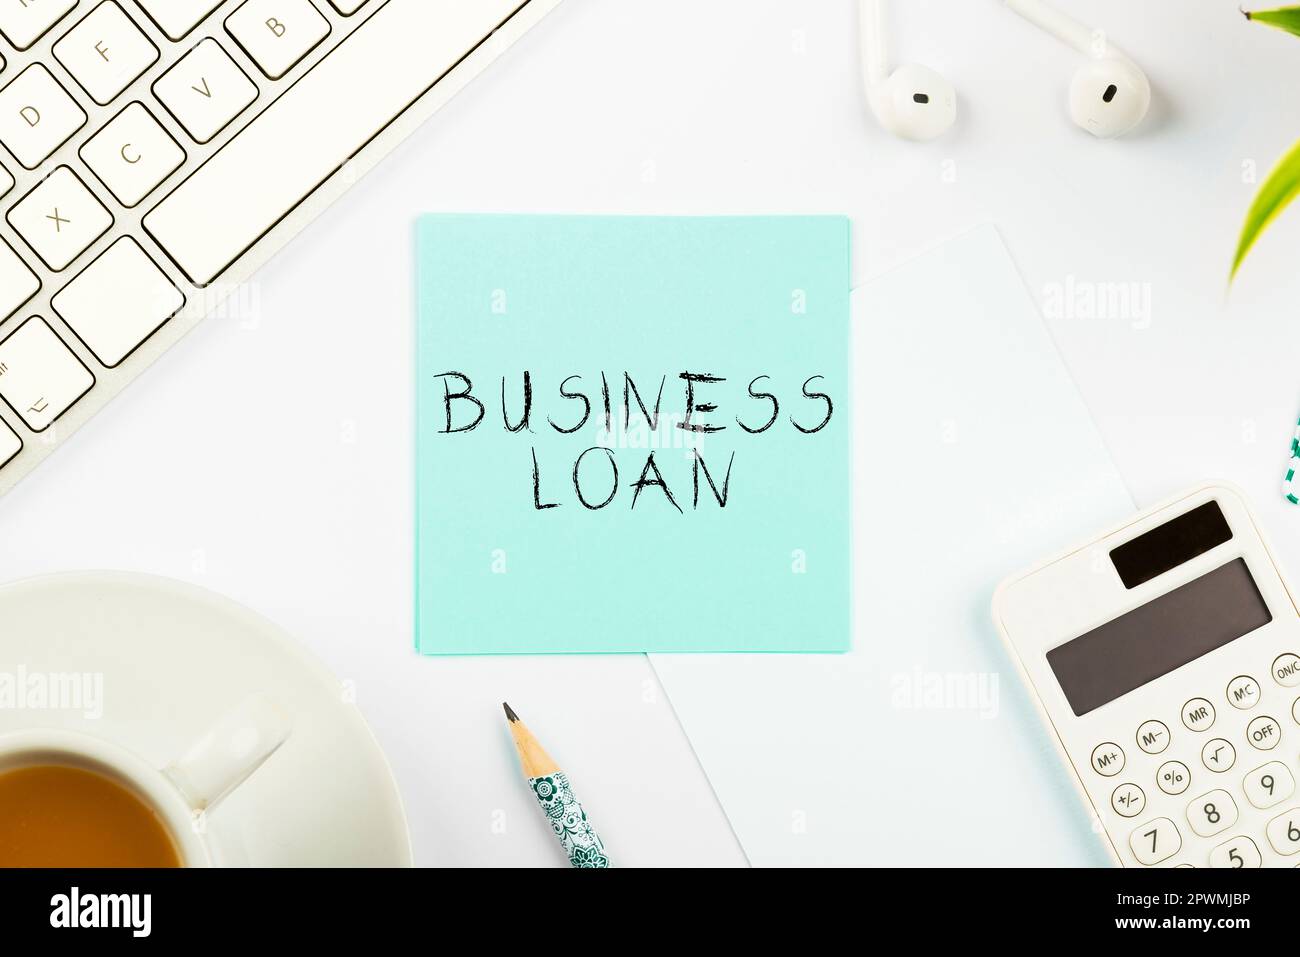 Text showing inspiration Business Loan, Concept meaning Credit Mortgage Financial Assistance Cash Advances Debt Stock Photo